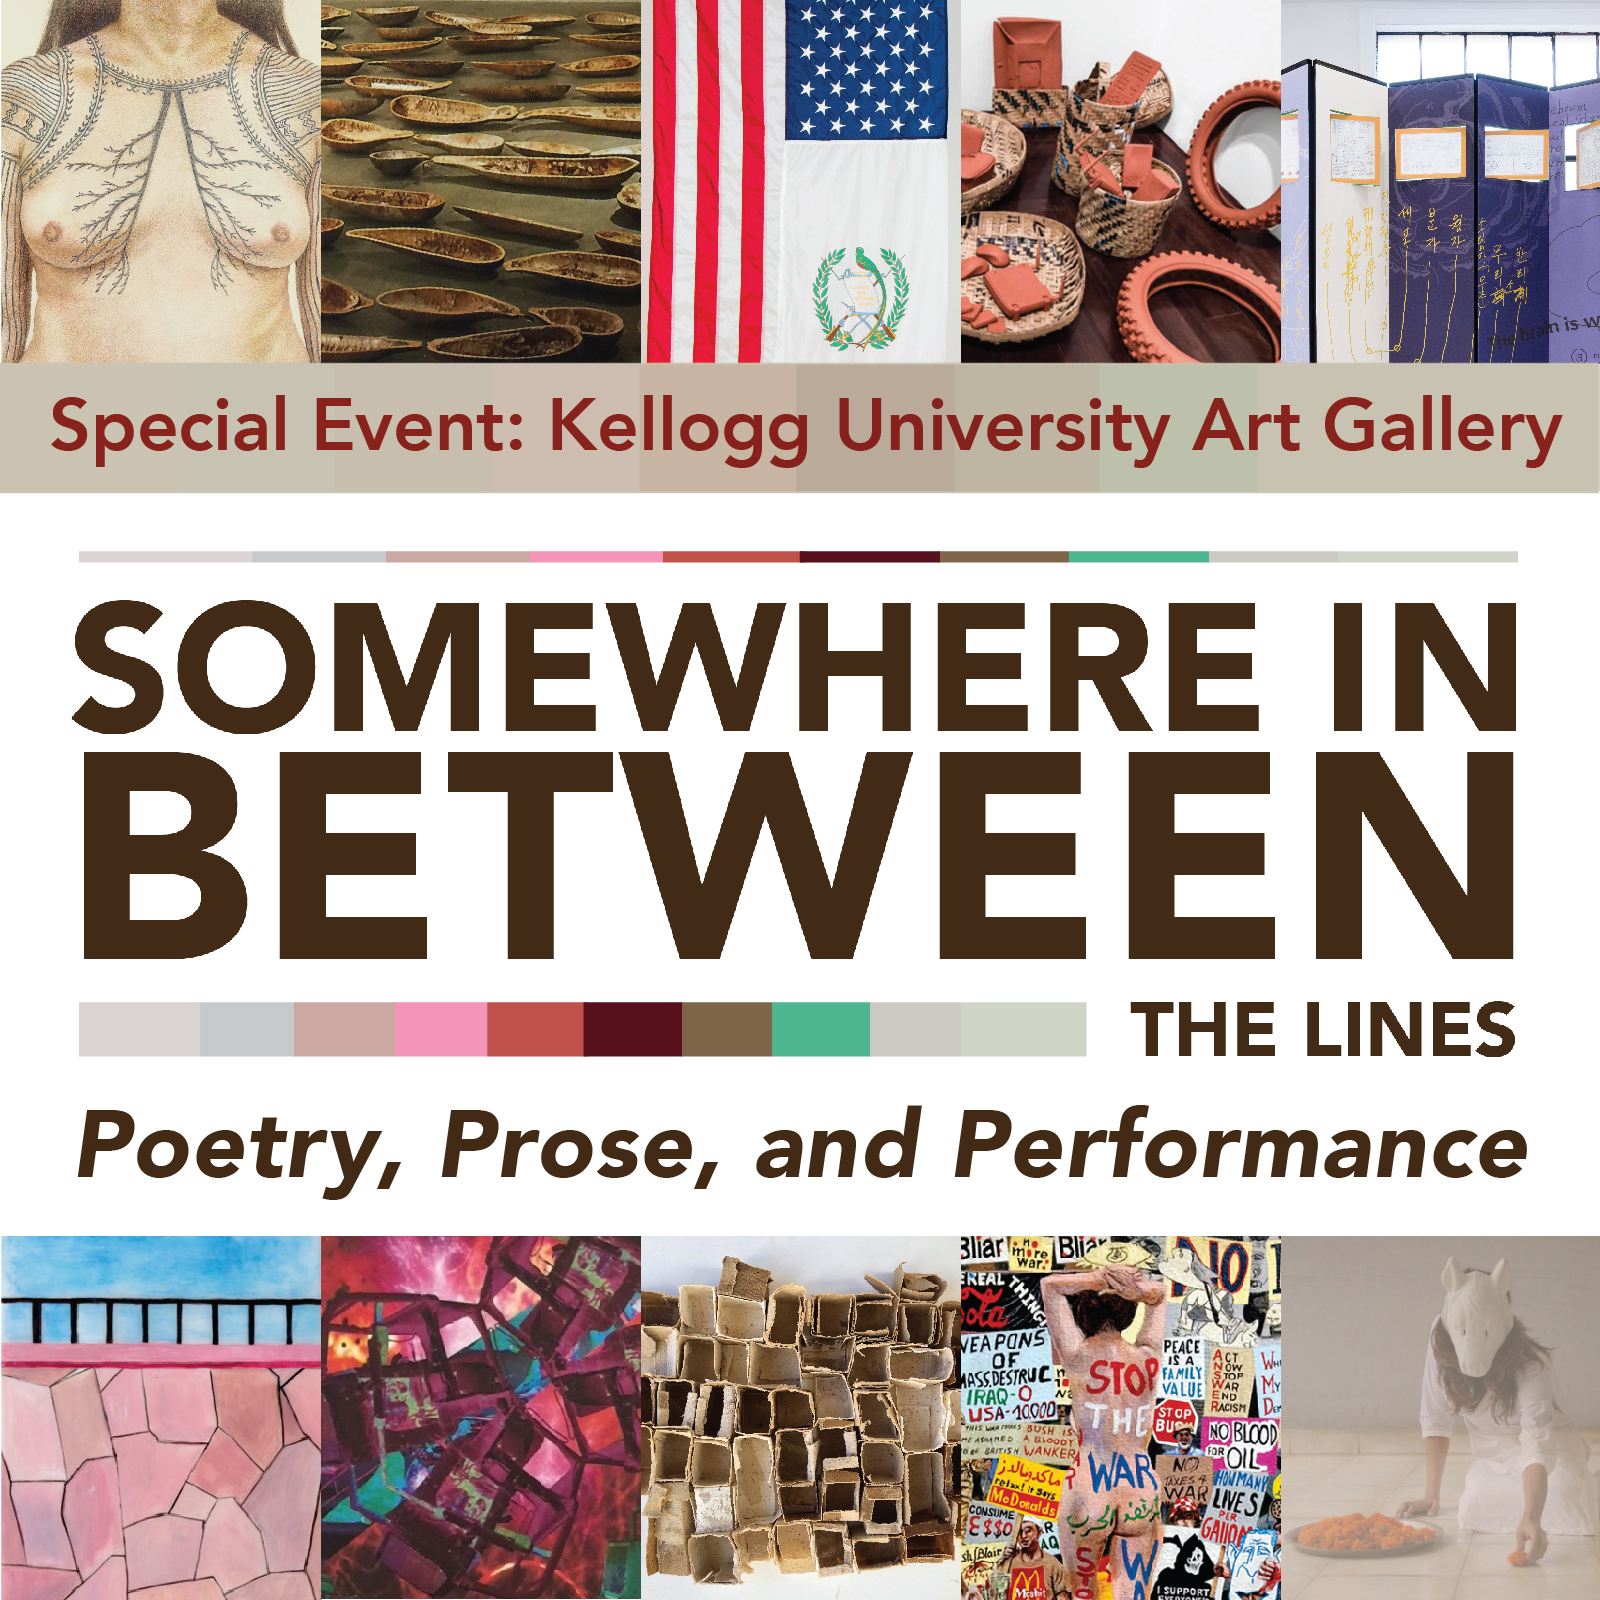 Special Event: Kellogg University Art Gallery. Somewhere in Between the Lines. Poetry, Prose and Performance